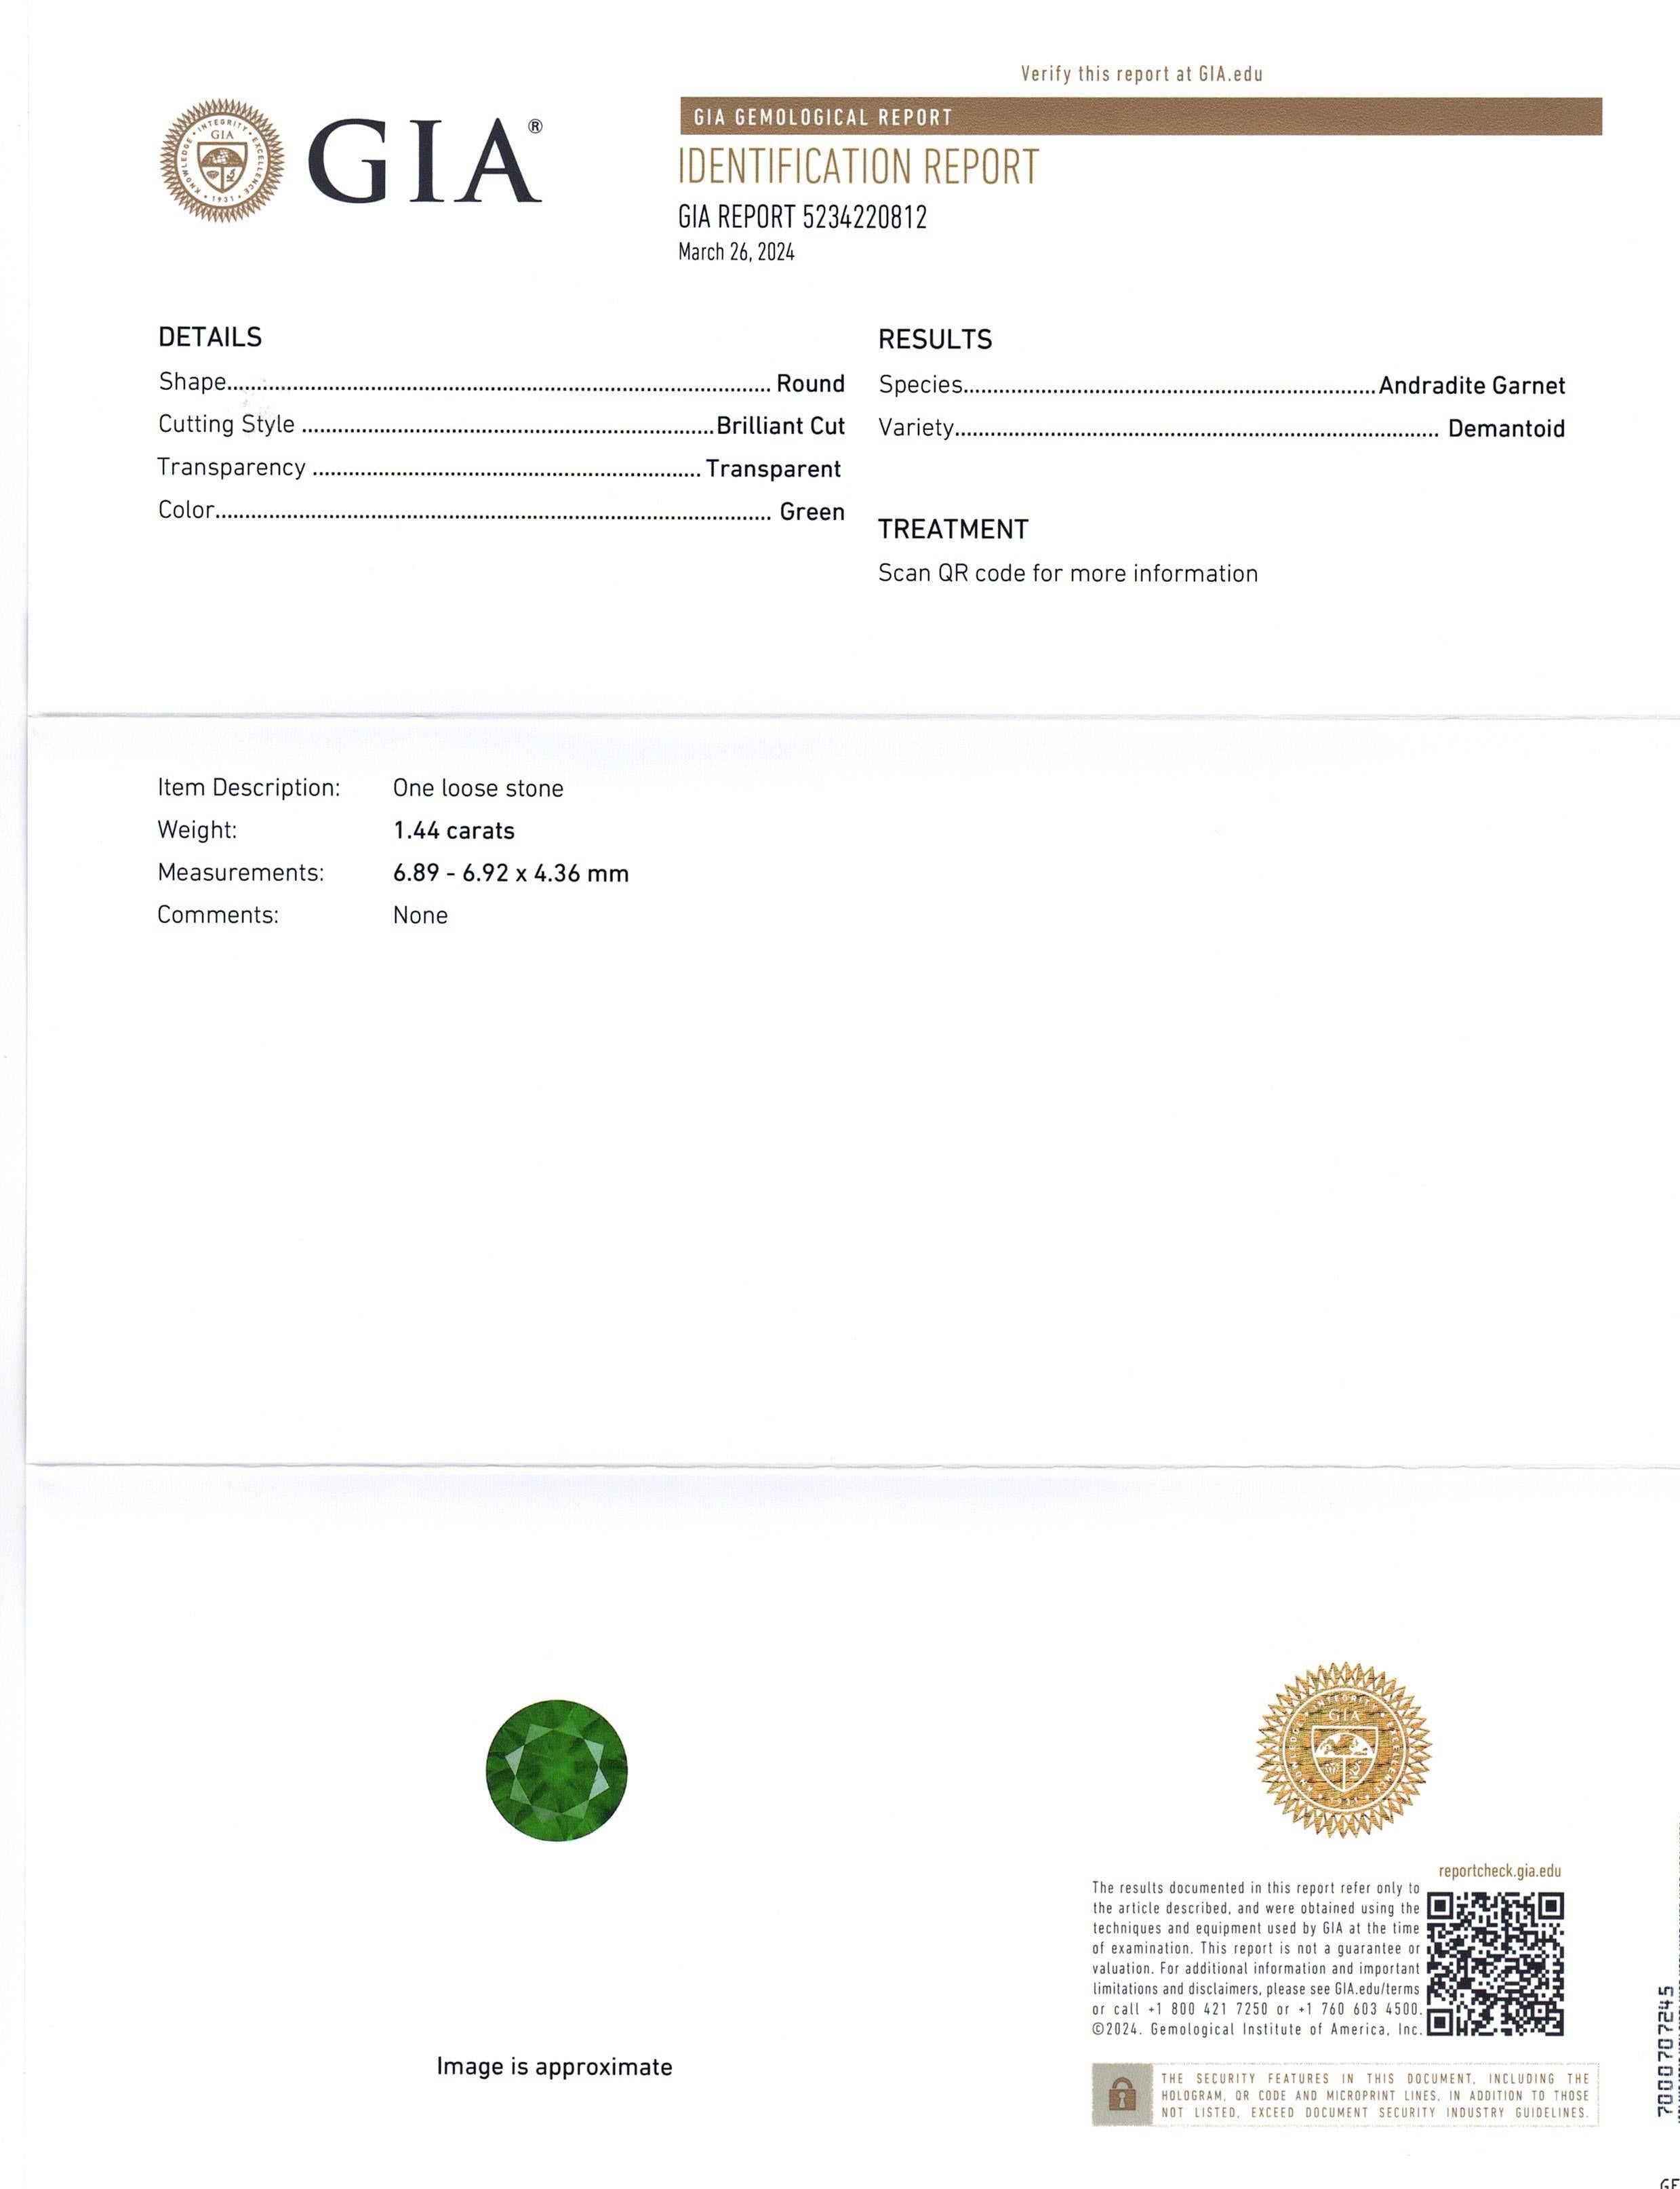 This is a stunning GIA Certified Demantoid 


The GIA report reads as follows:

GIA Report Number: 5234220812
Shape: Round
Cutting Style: Brilliant Cut
Cutting Style: Crown: 
Cutting Style: Pavilion: 
Transparency: Transparent
Colour: